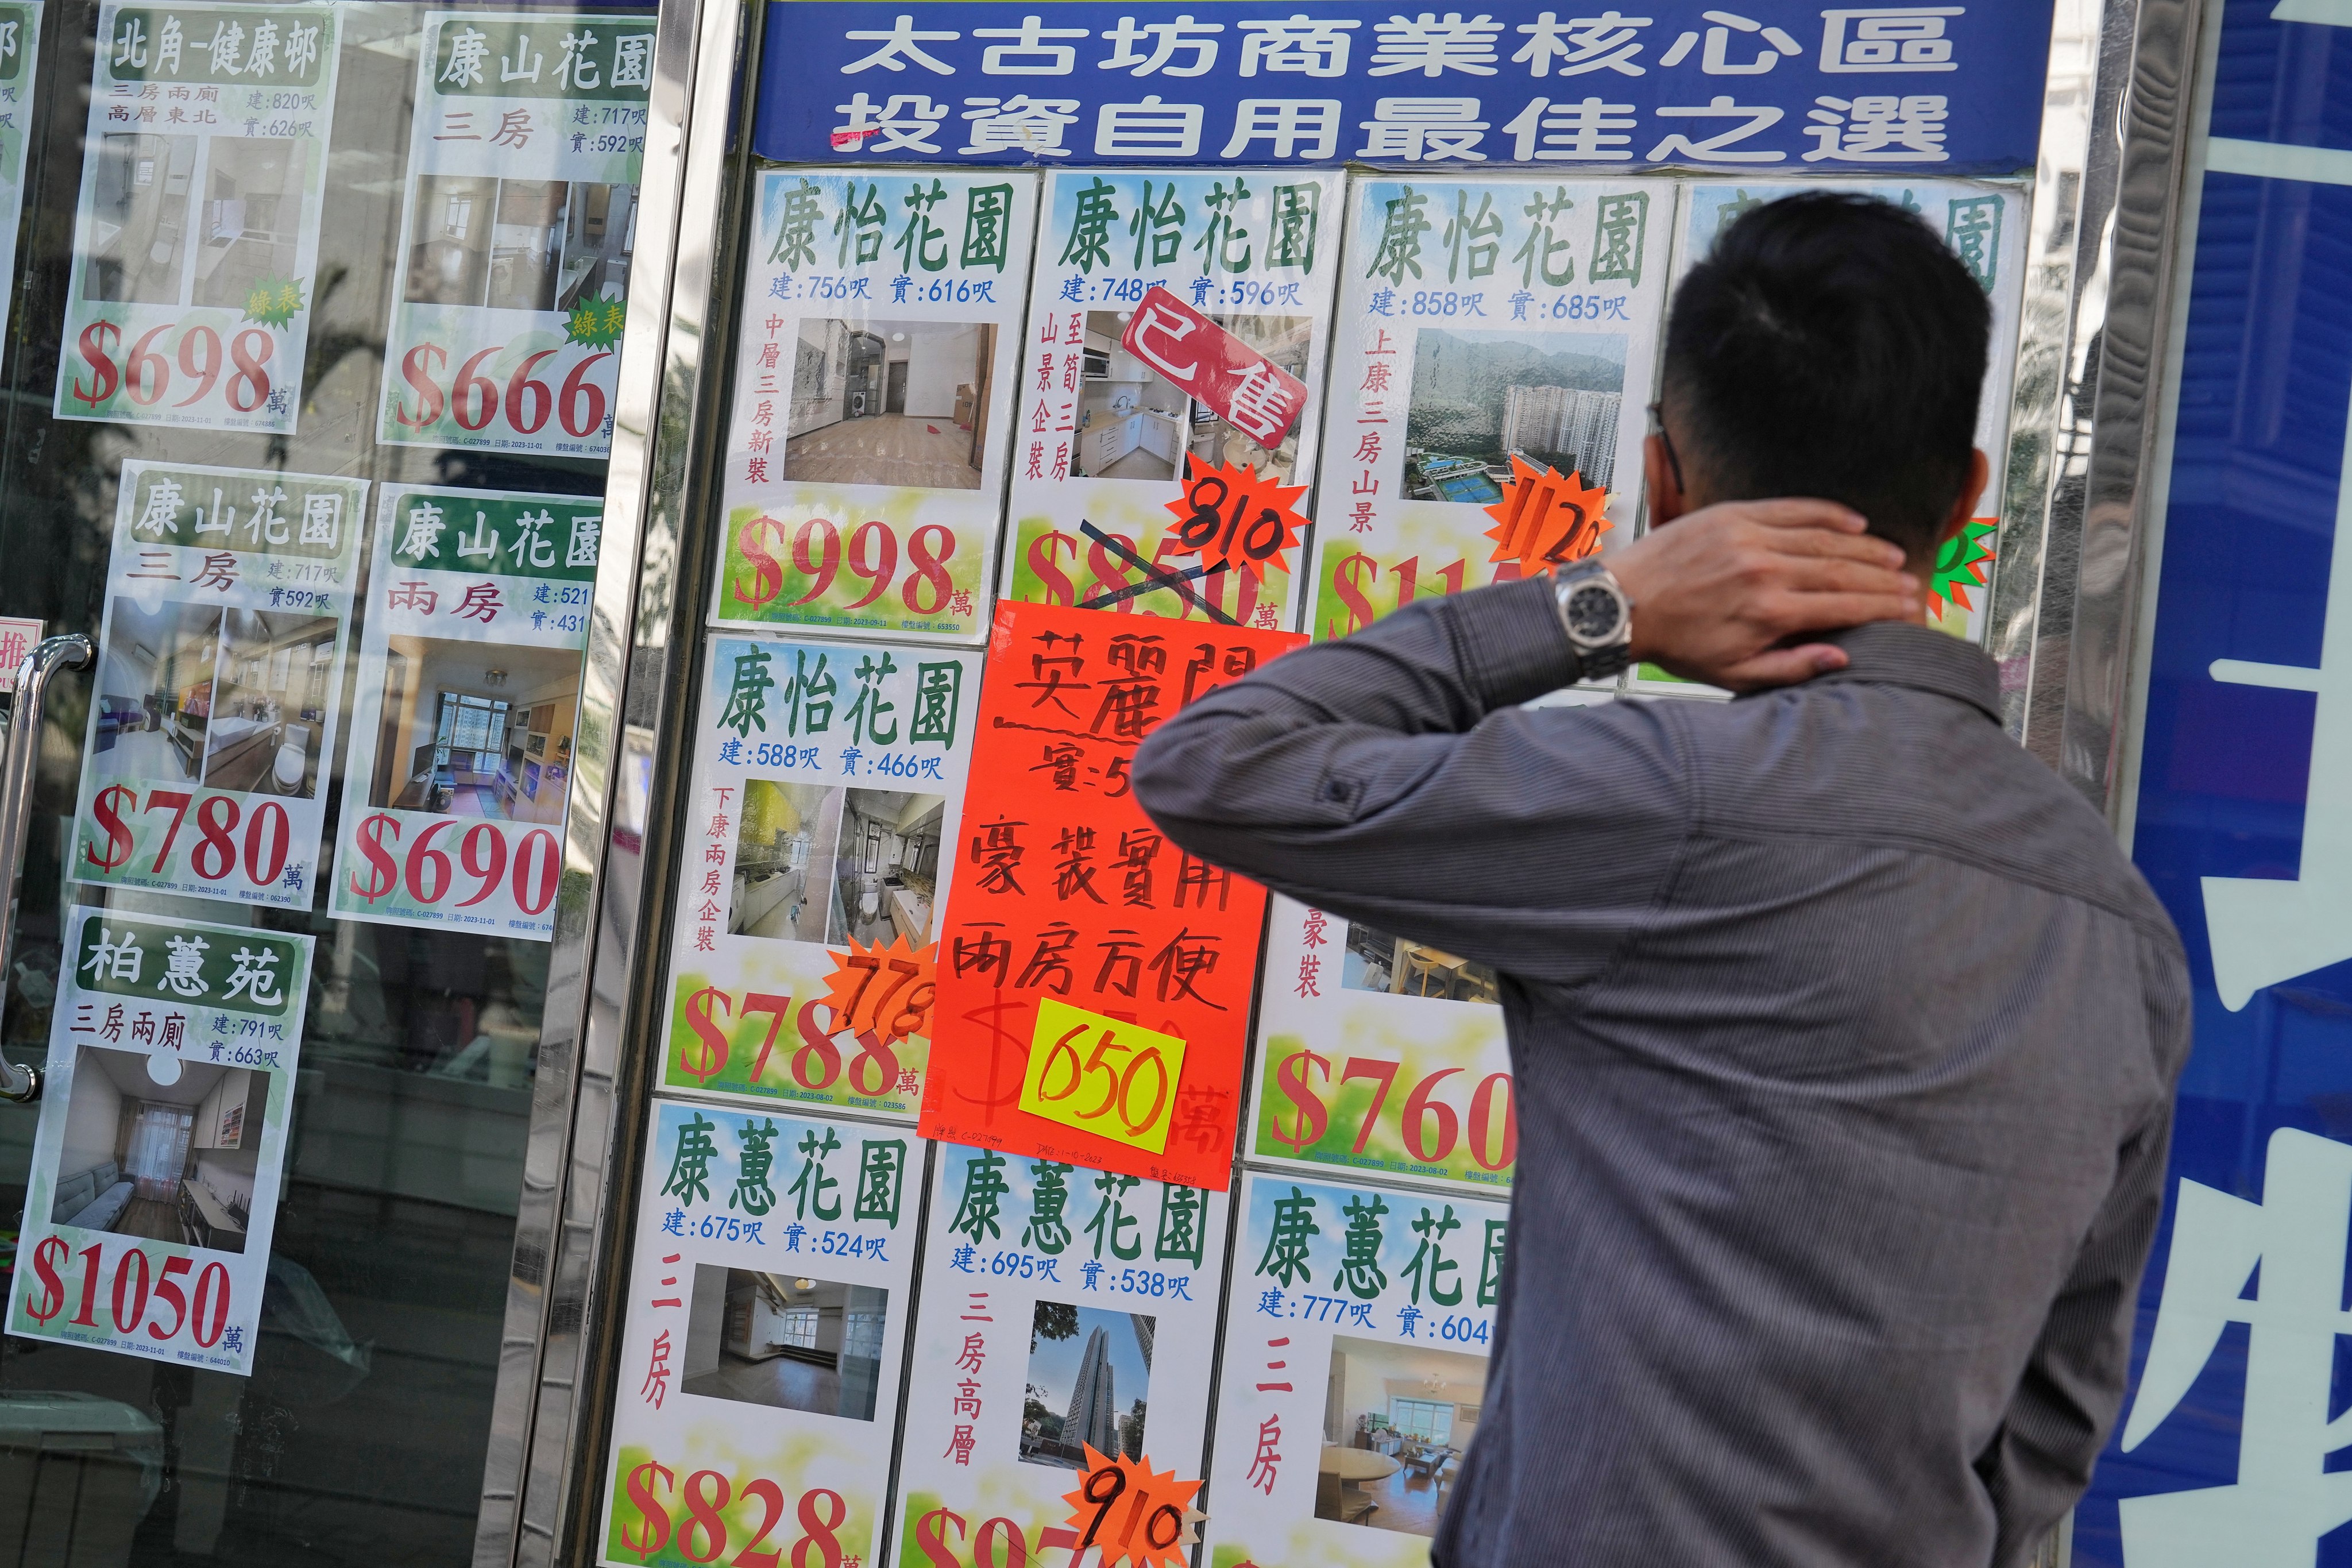 Homes with marked down prices are advertised for sale at a property agency in Quarry Bay, Hong Kong. Photo: Elson LI